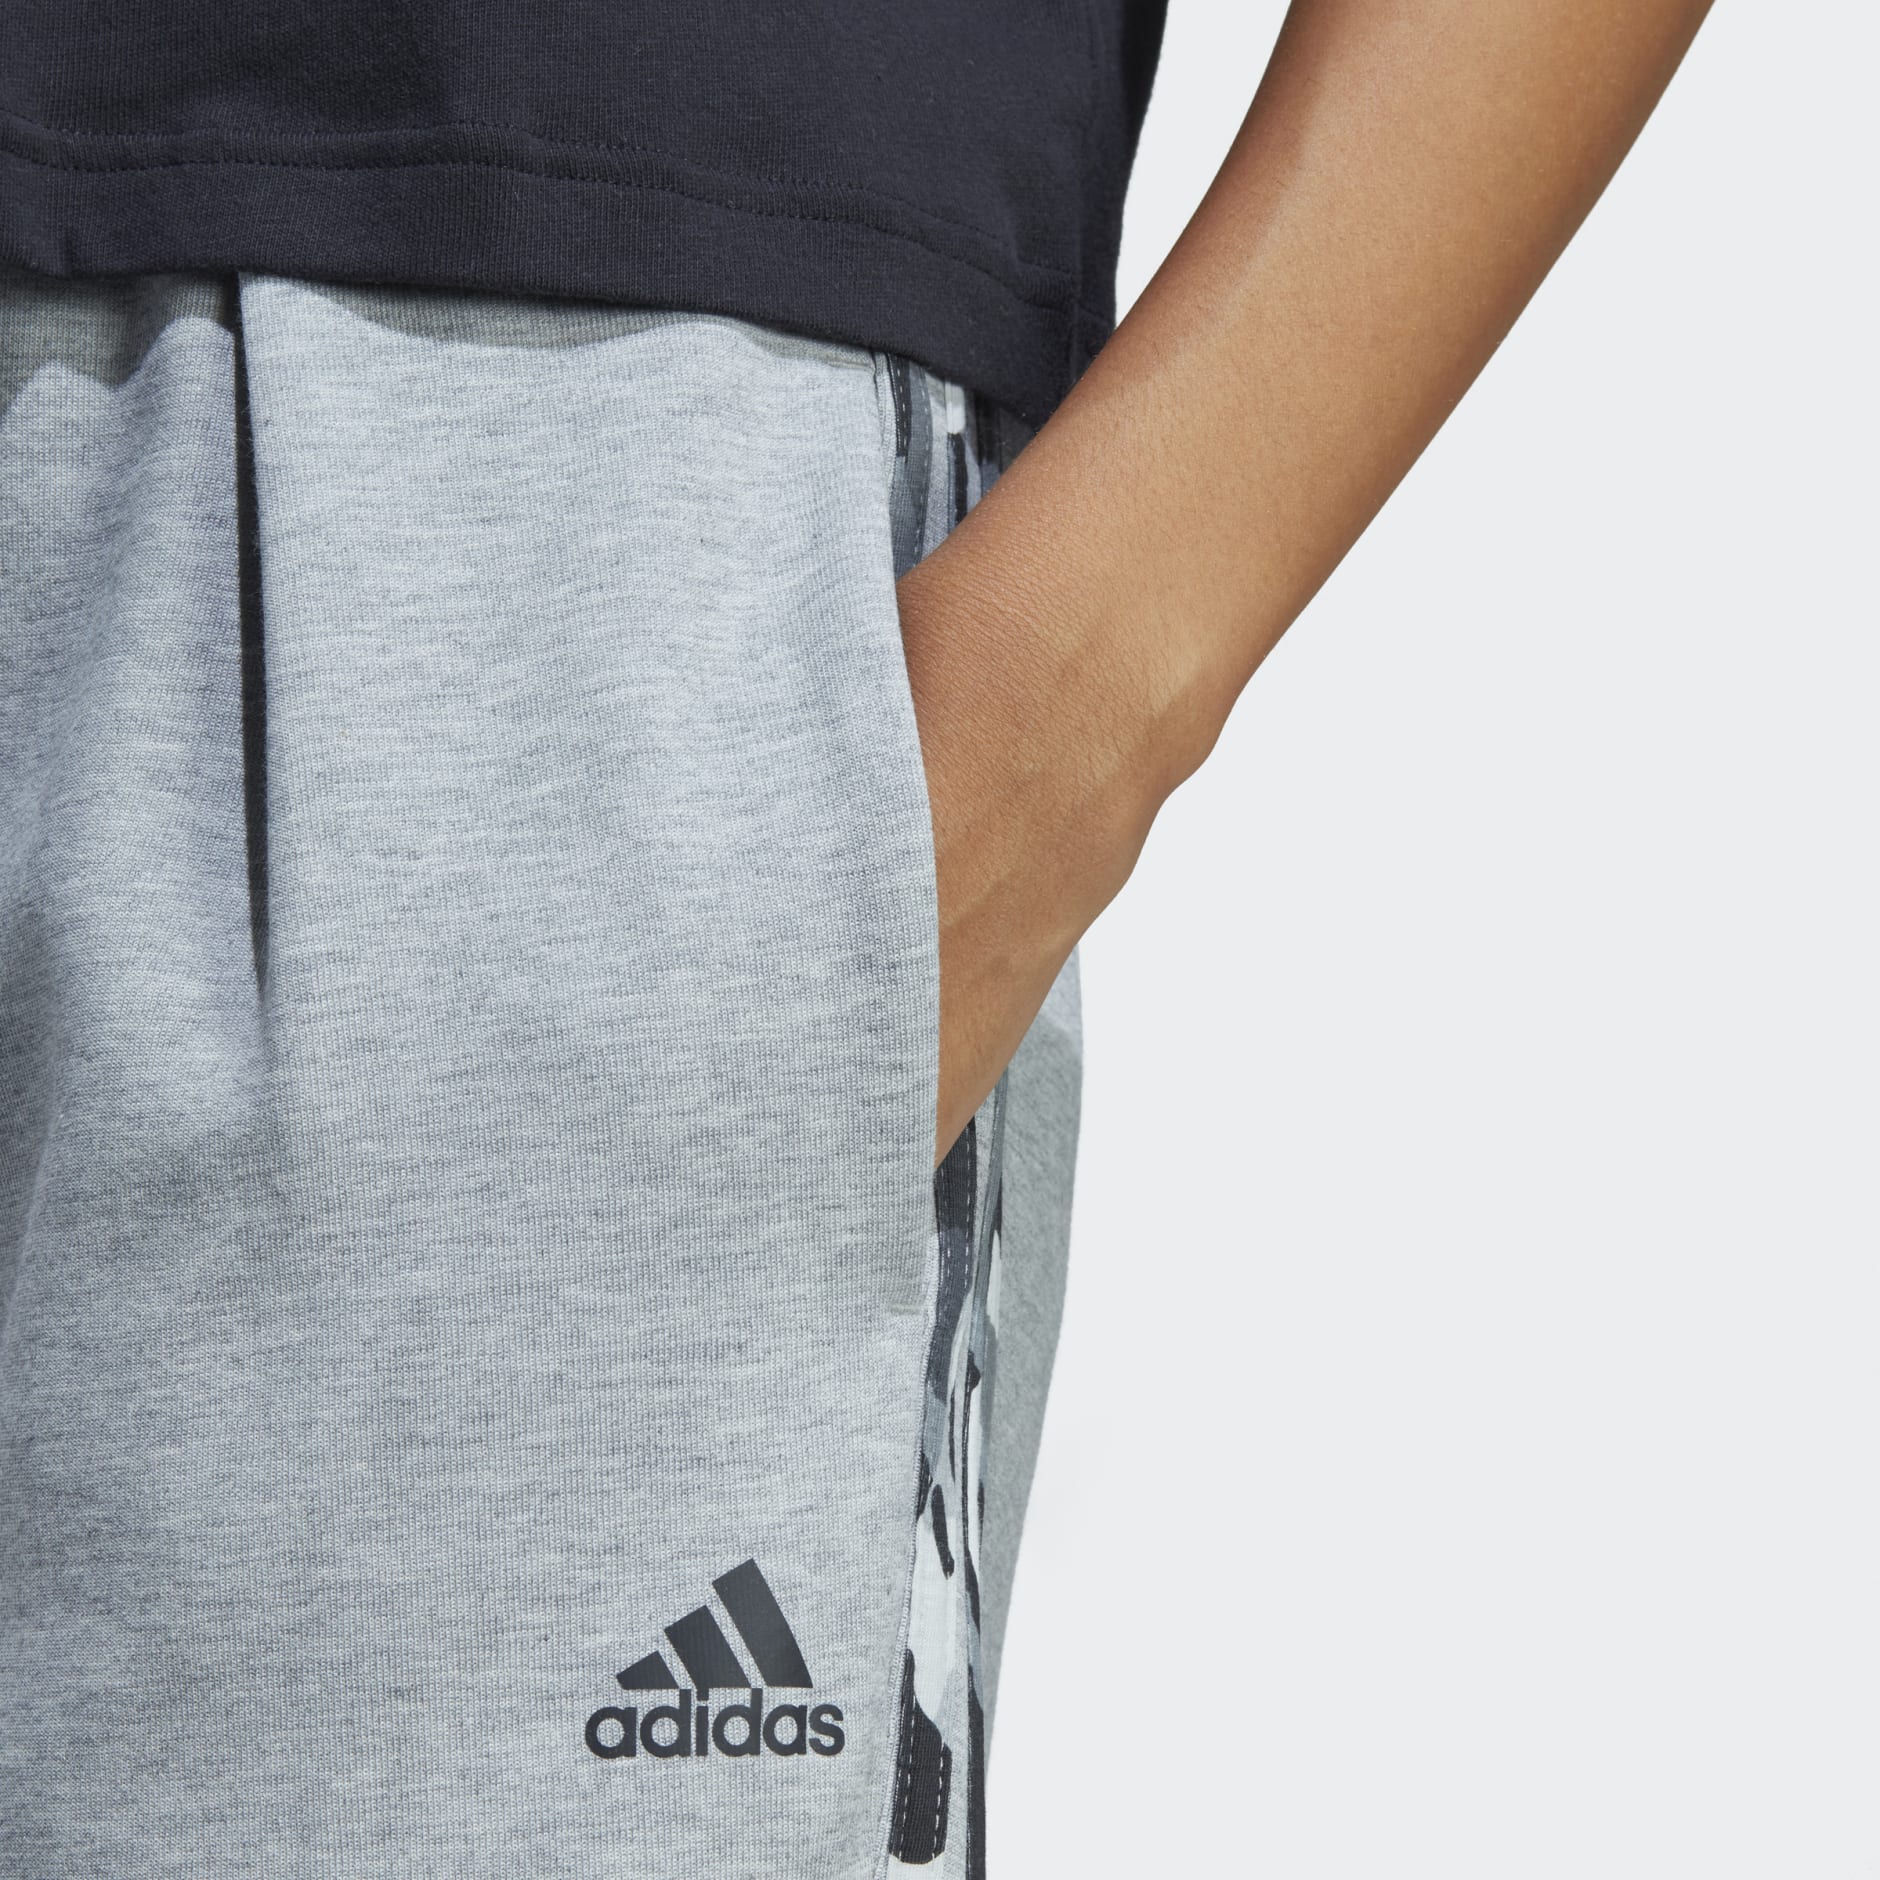 Clothing - Graphic Pants - Grey | adidas South Africa